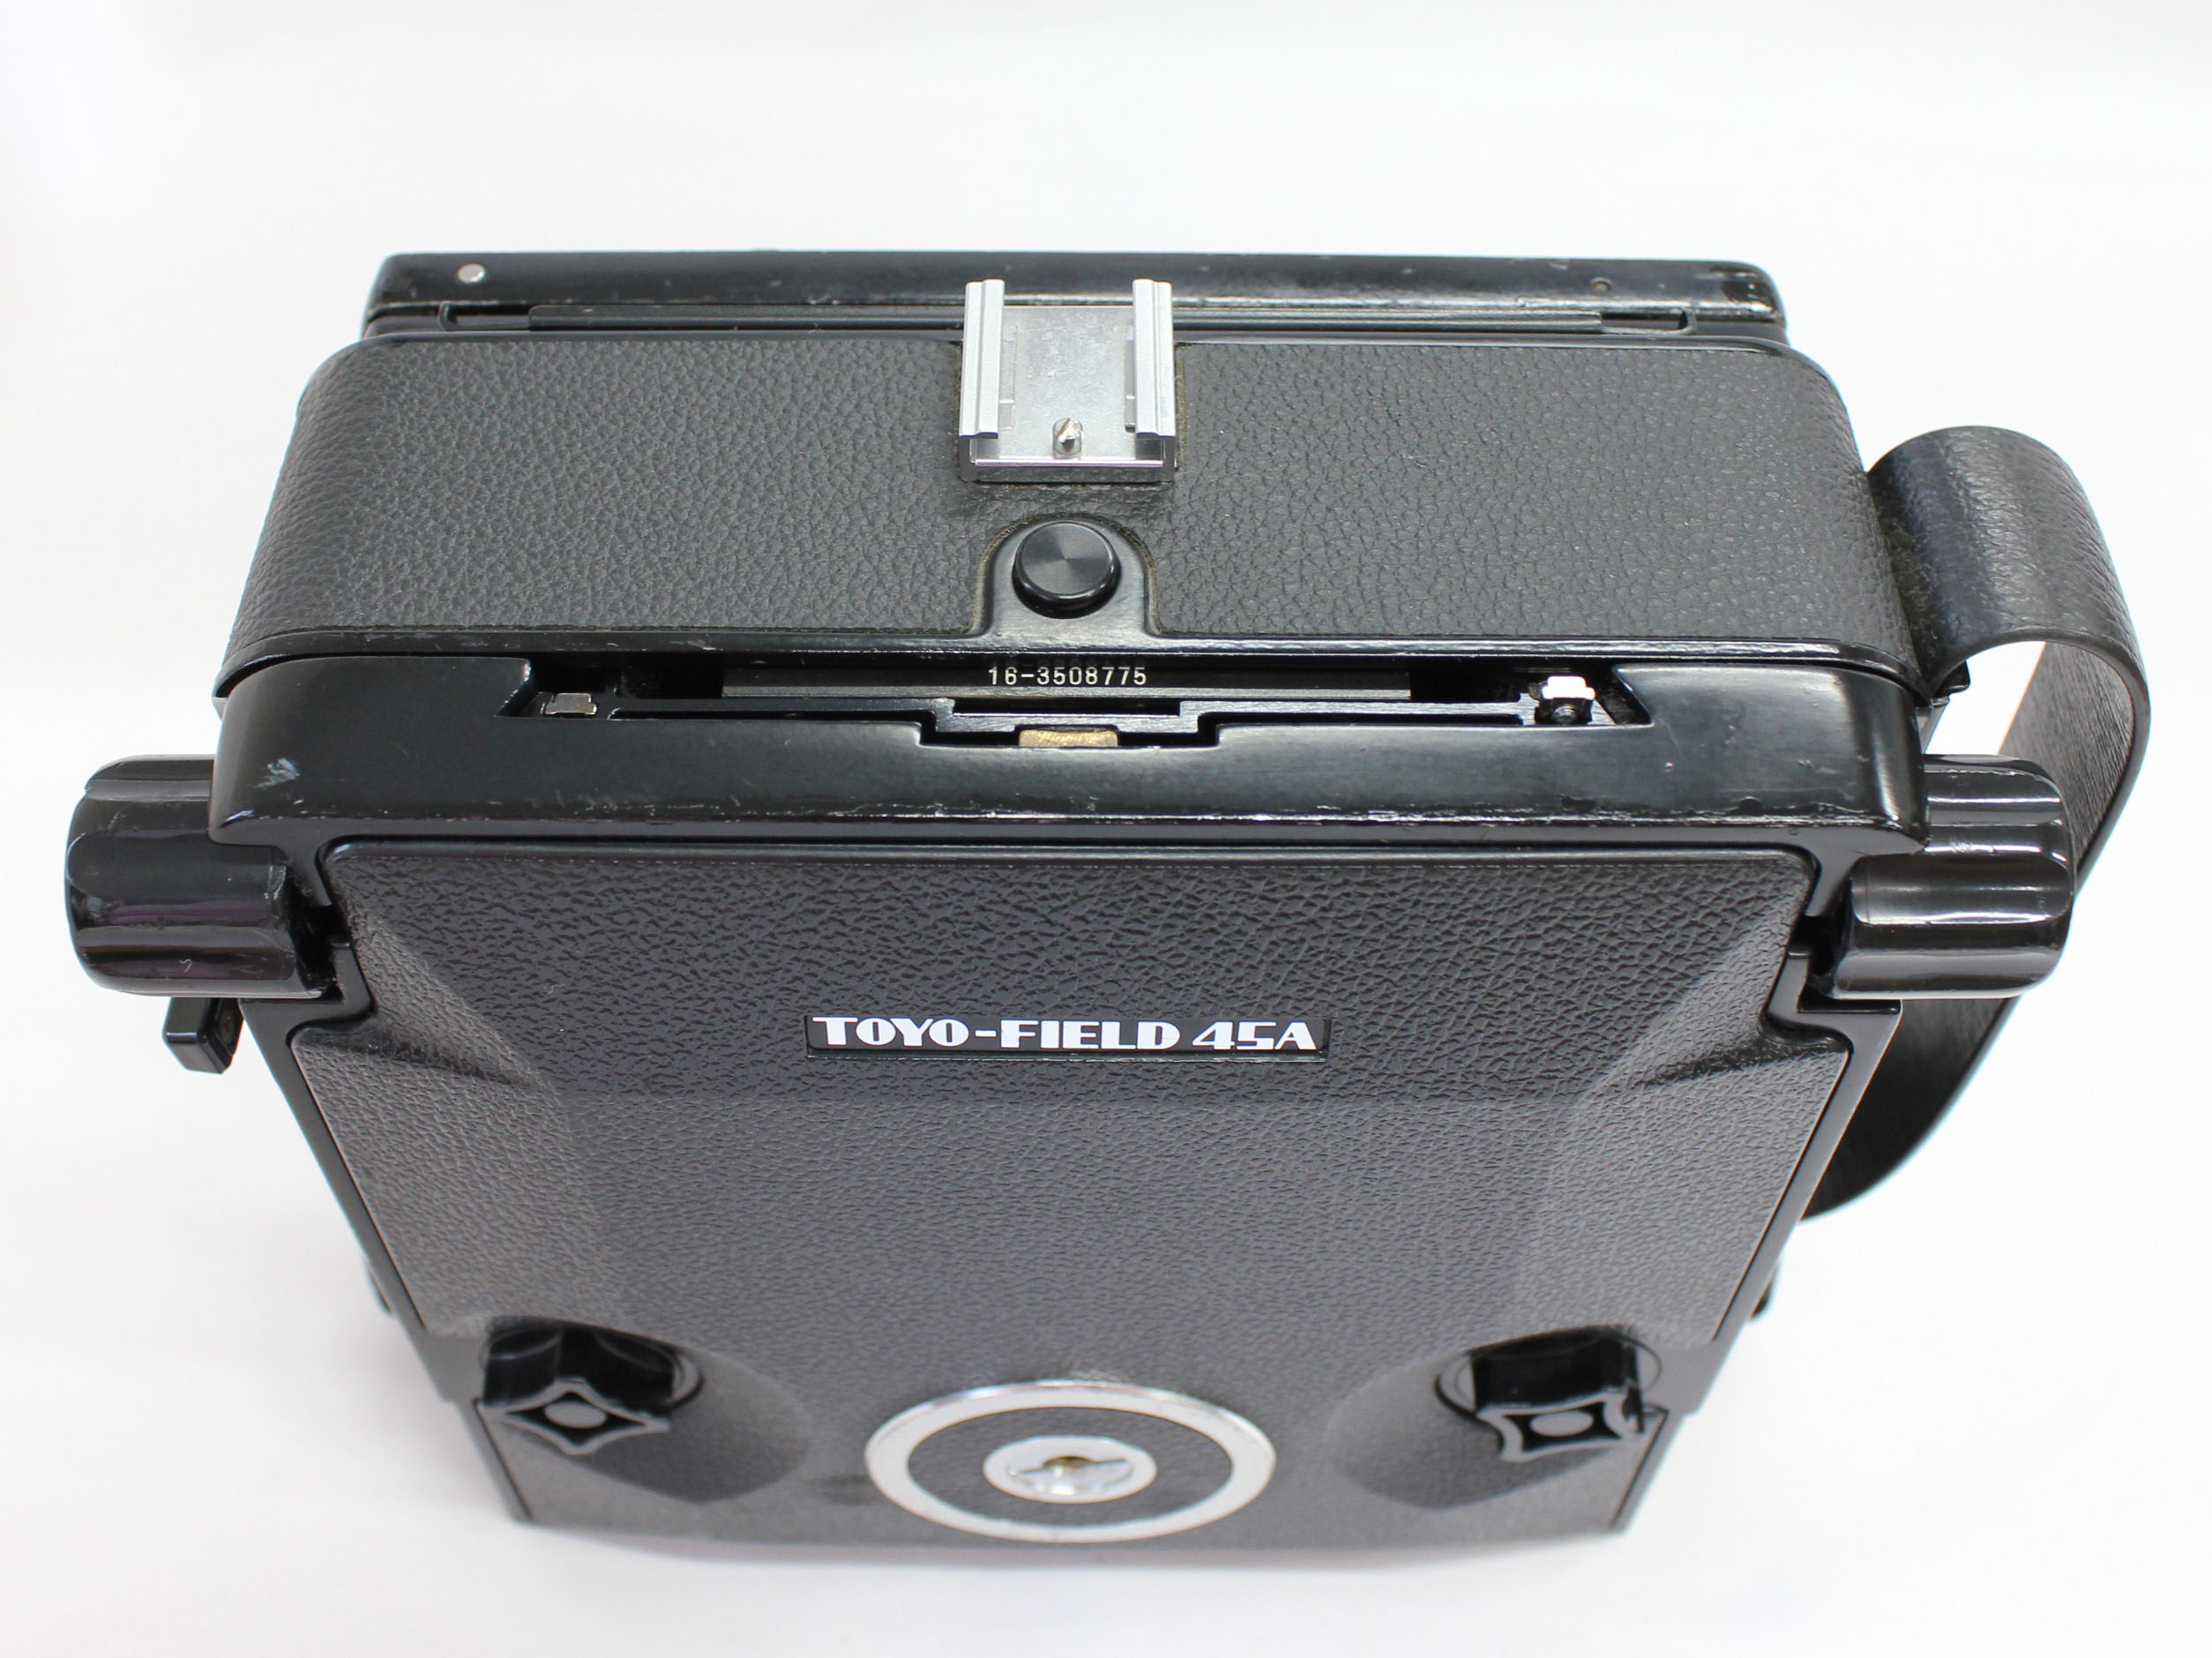 Toyo Field 45A 4x5 Large Format Film Camera with Revolving Back from Japan Photo 13